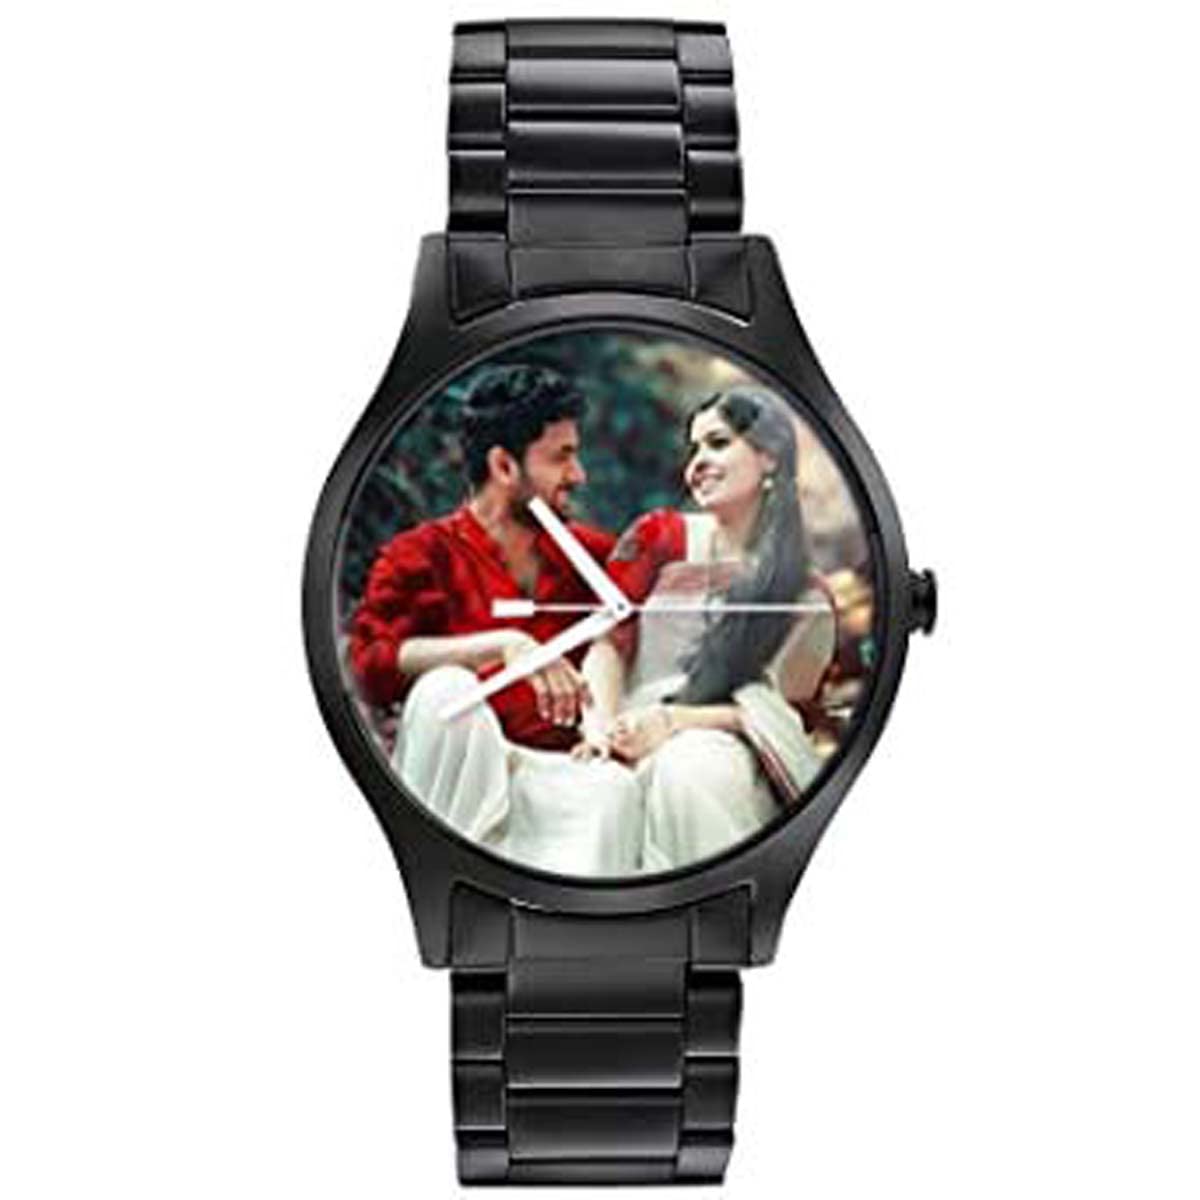 Personalized/Customized Wrist Watch for Gift,Anniversary